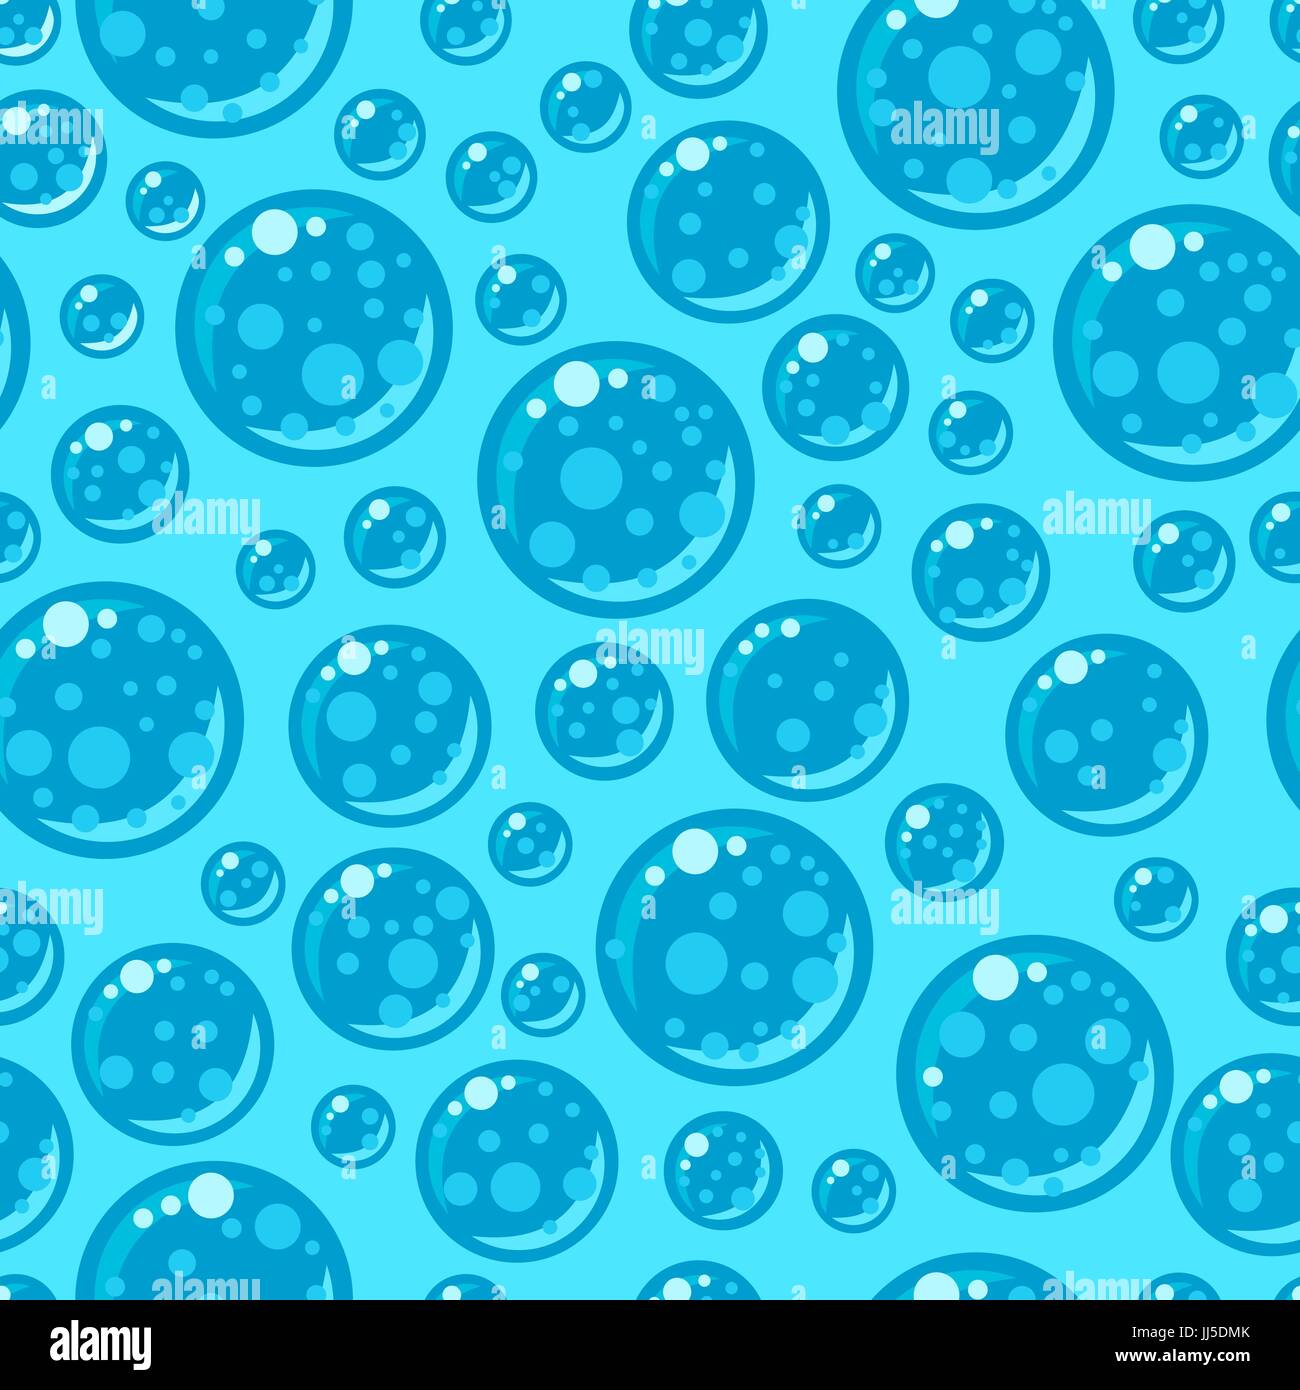 Seamless pattern with soap bubbles in flat style on blue background. Stock Vector